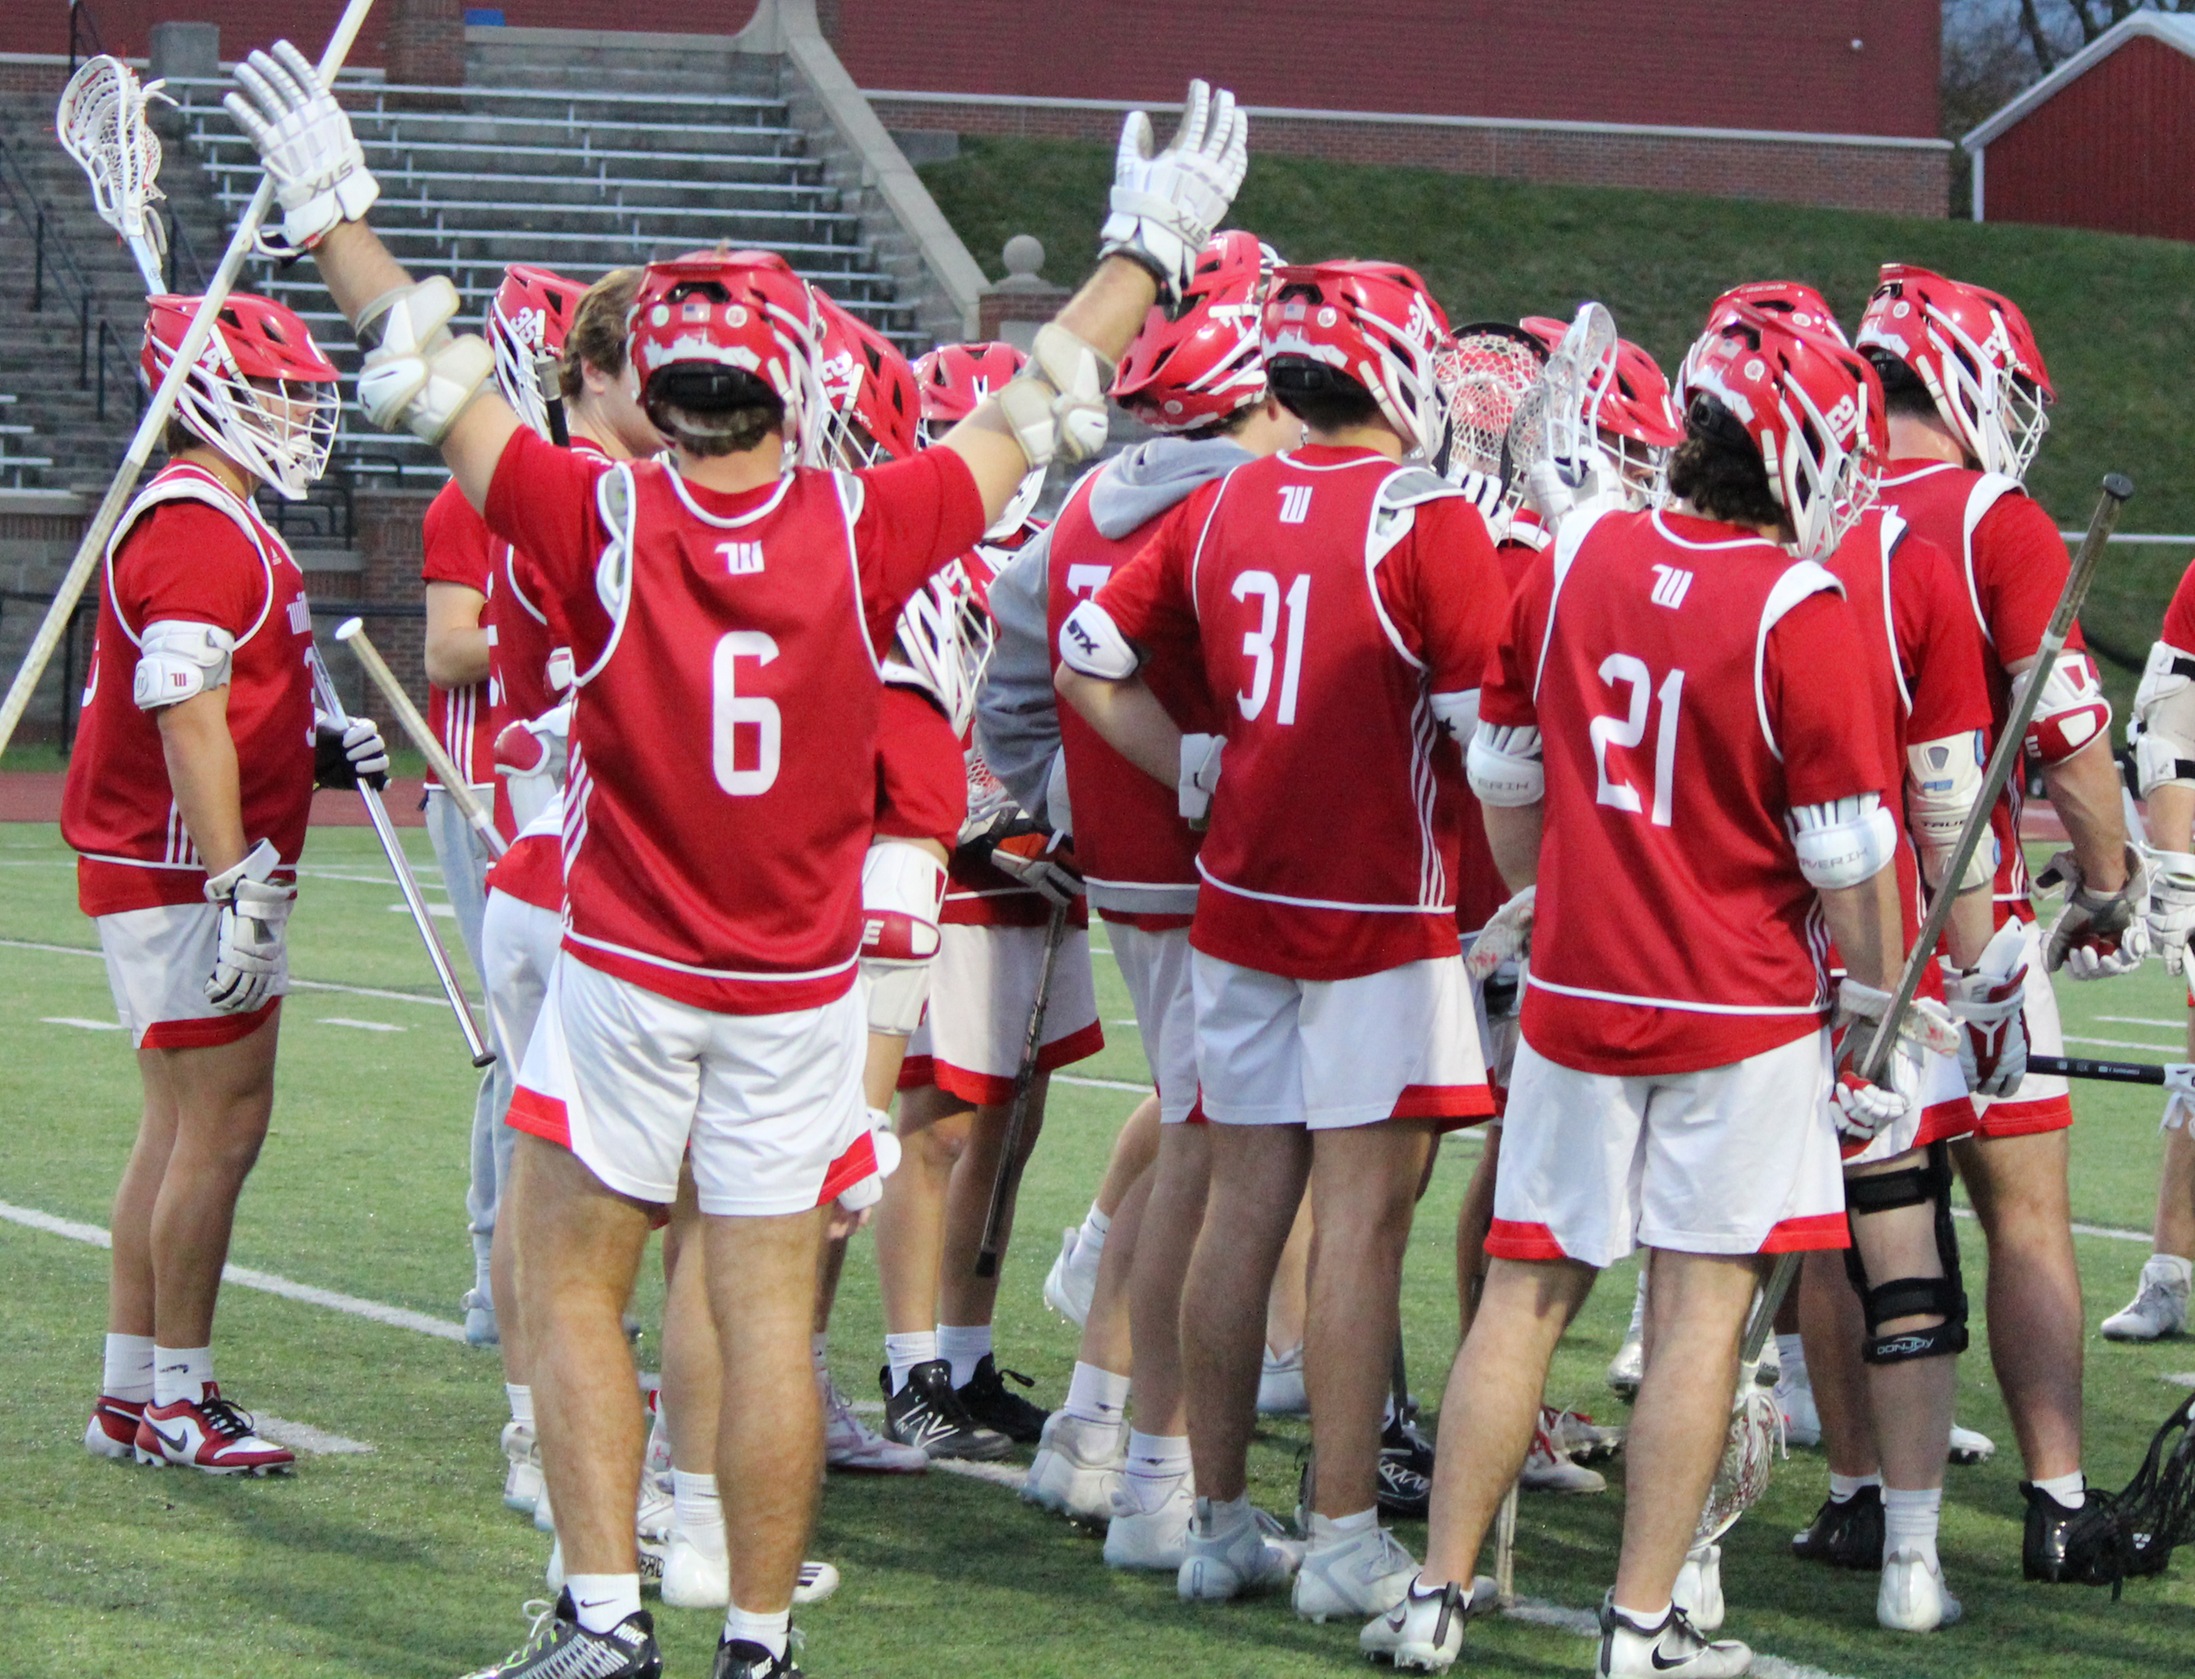 Men's Lacrosse improves to 2-0 with 14-9 win at Chatham